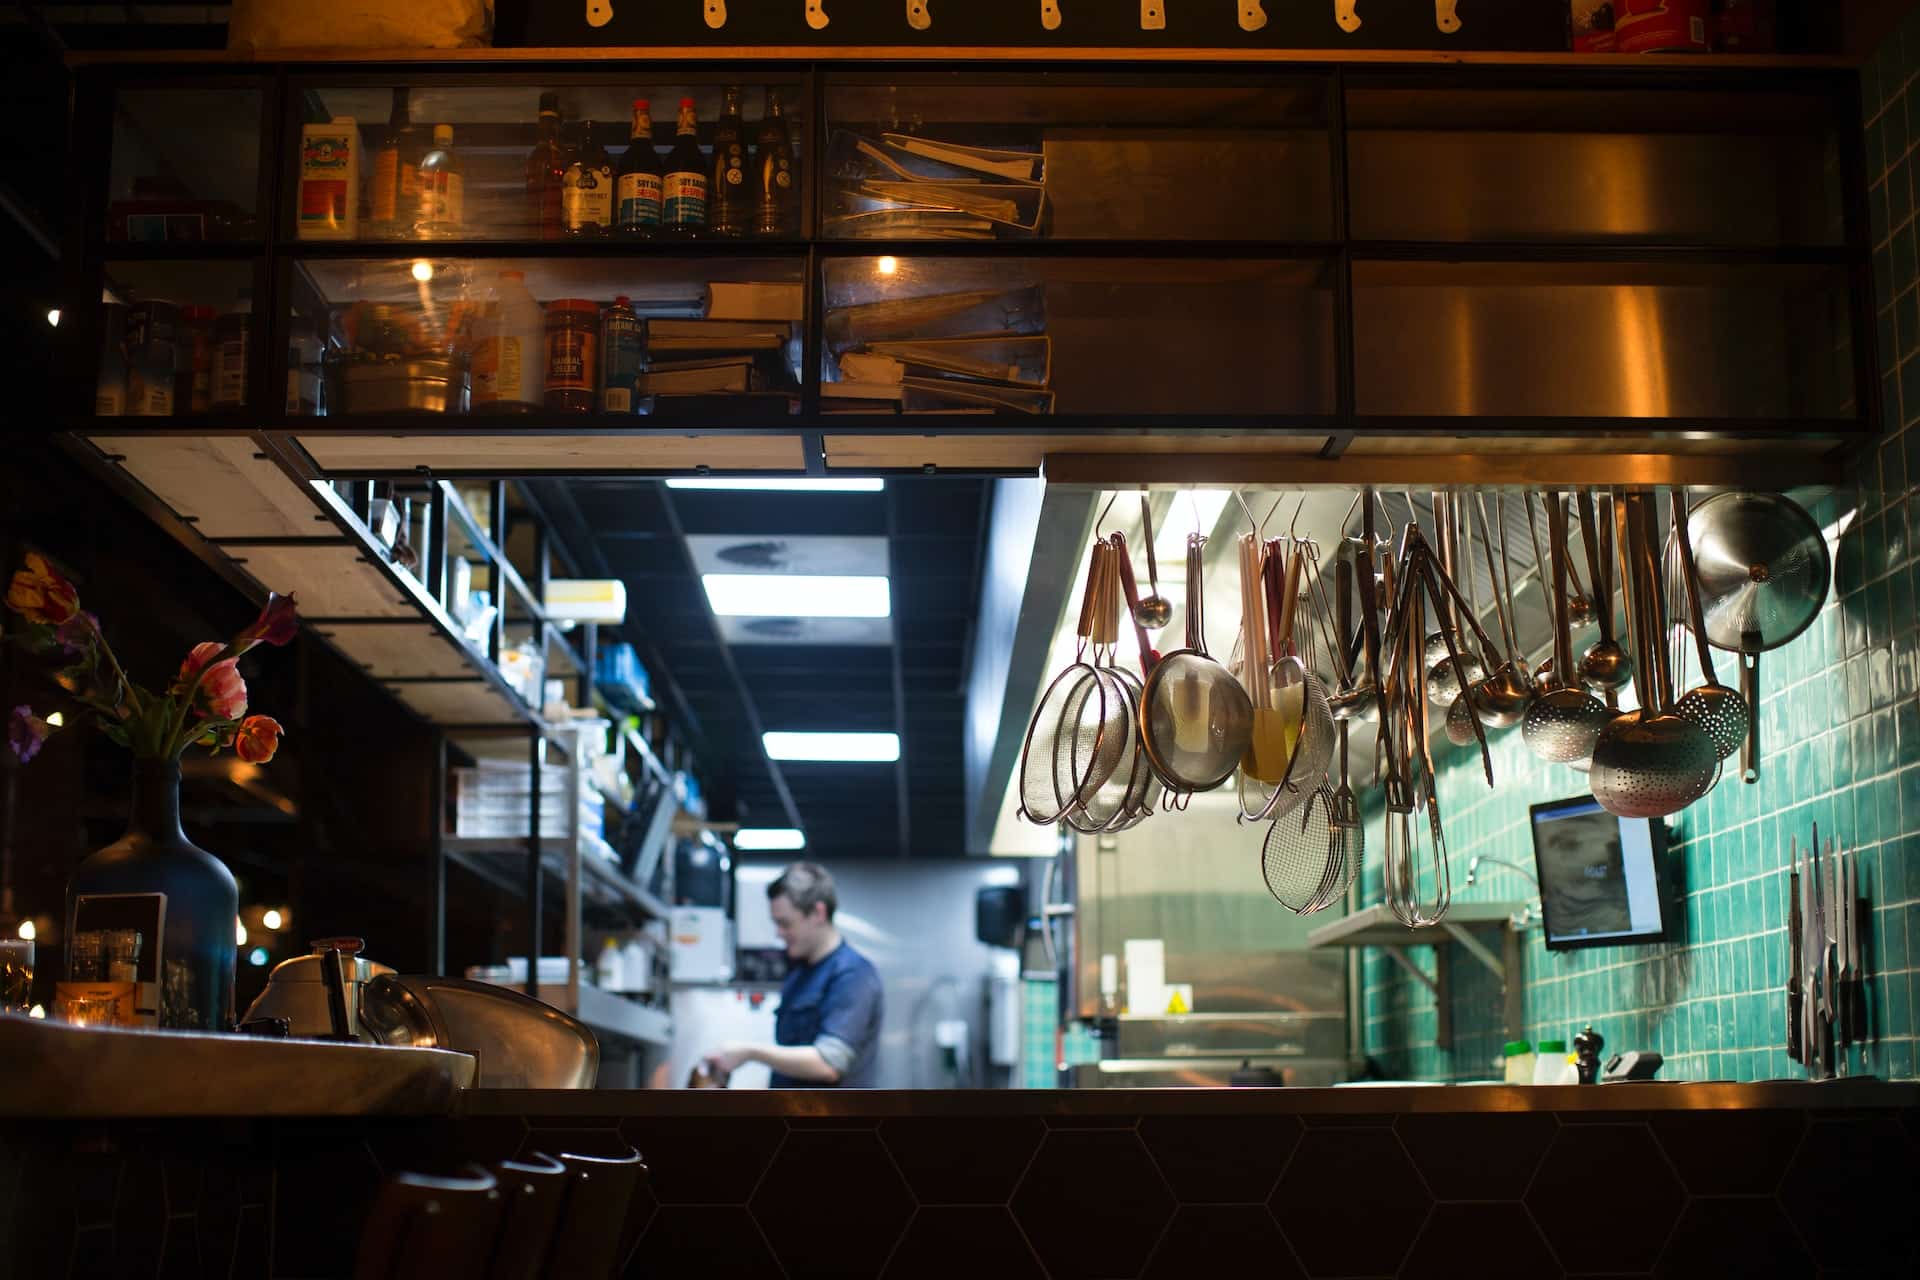 5 Tips for Keeping Your Restaurant Kitchen Organized